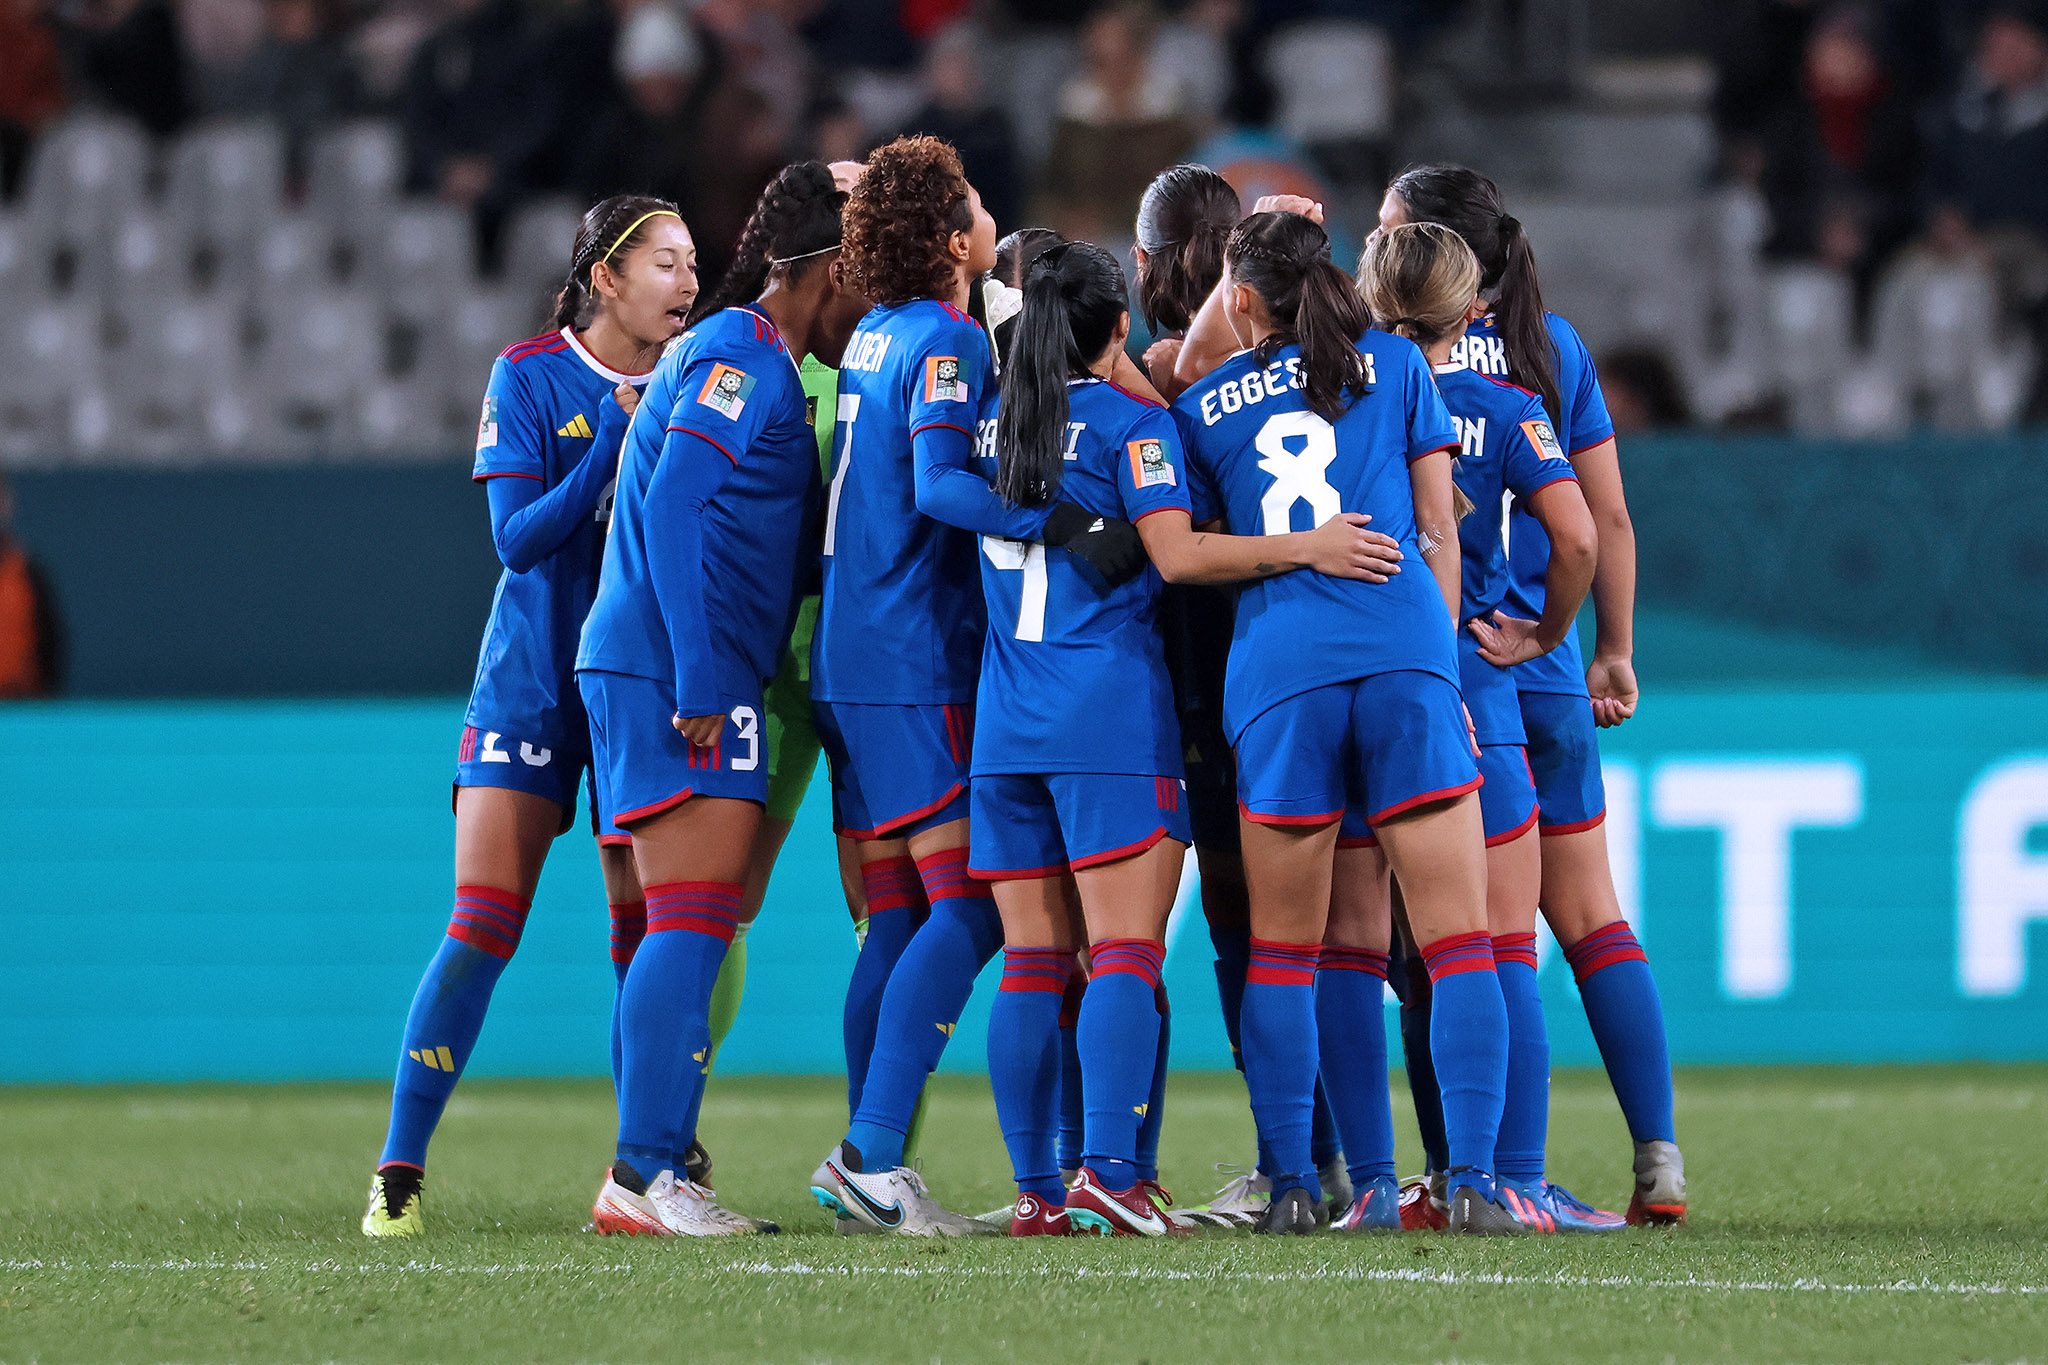 Philippine Women's U20 and U17 tryouts to start January 2023 - The  Philippine Football Federation